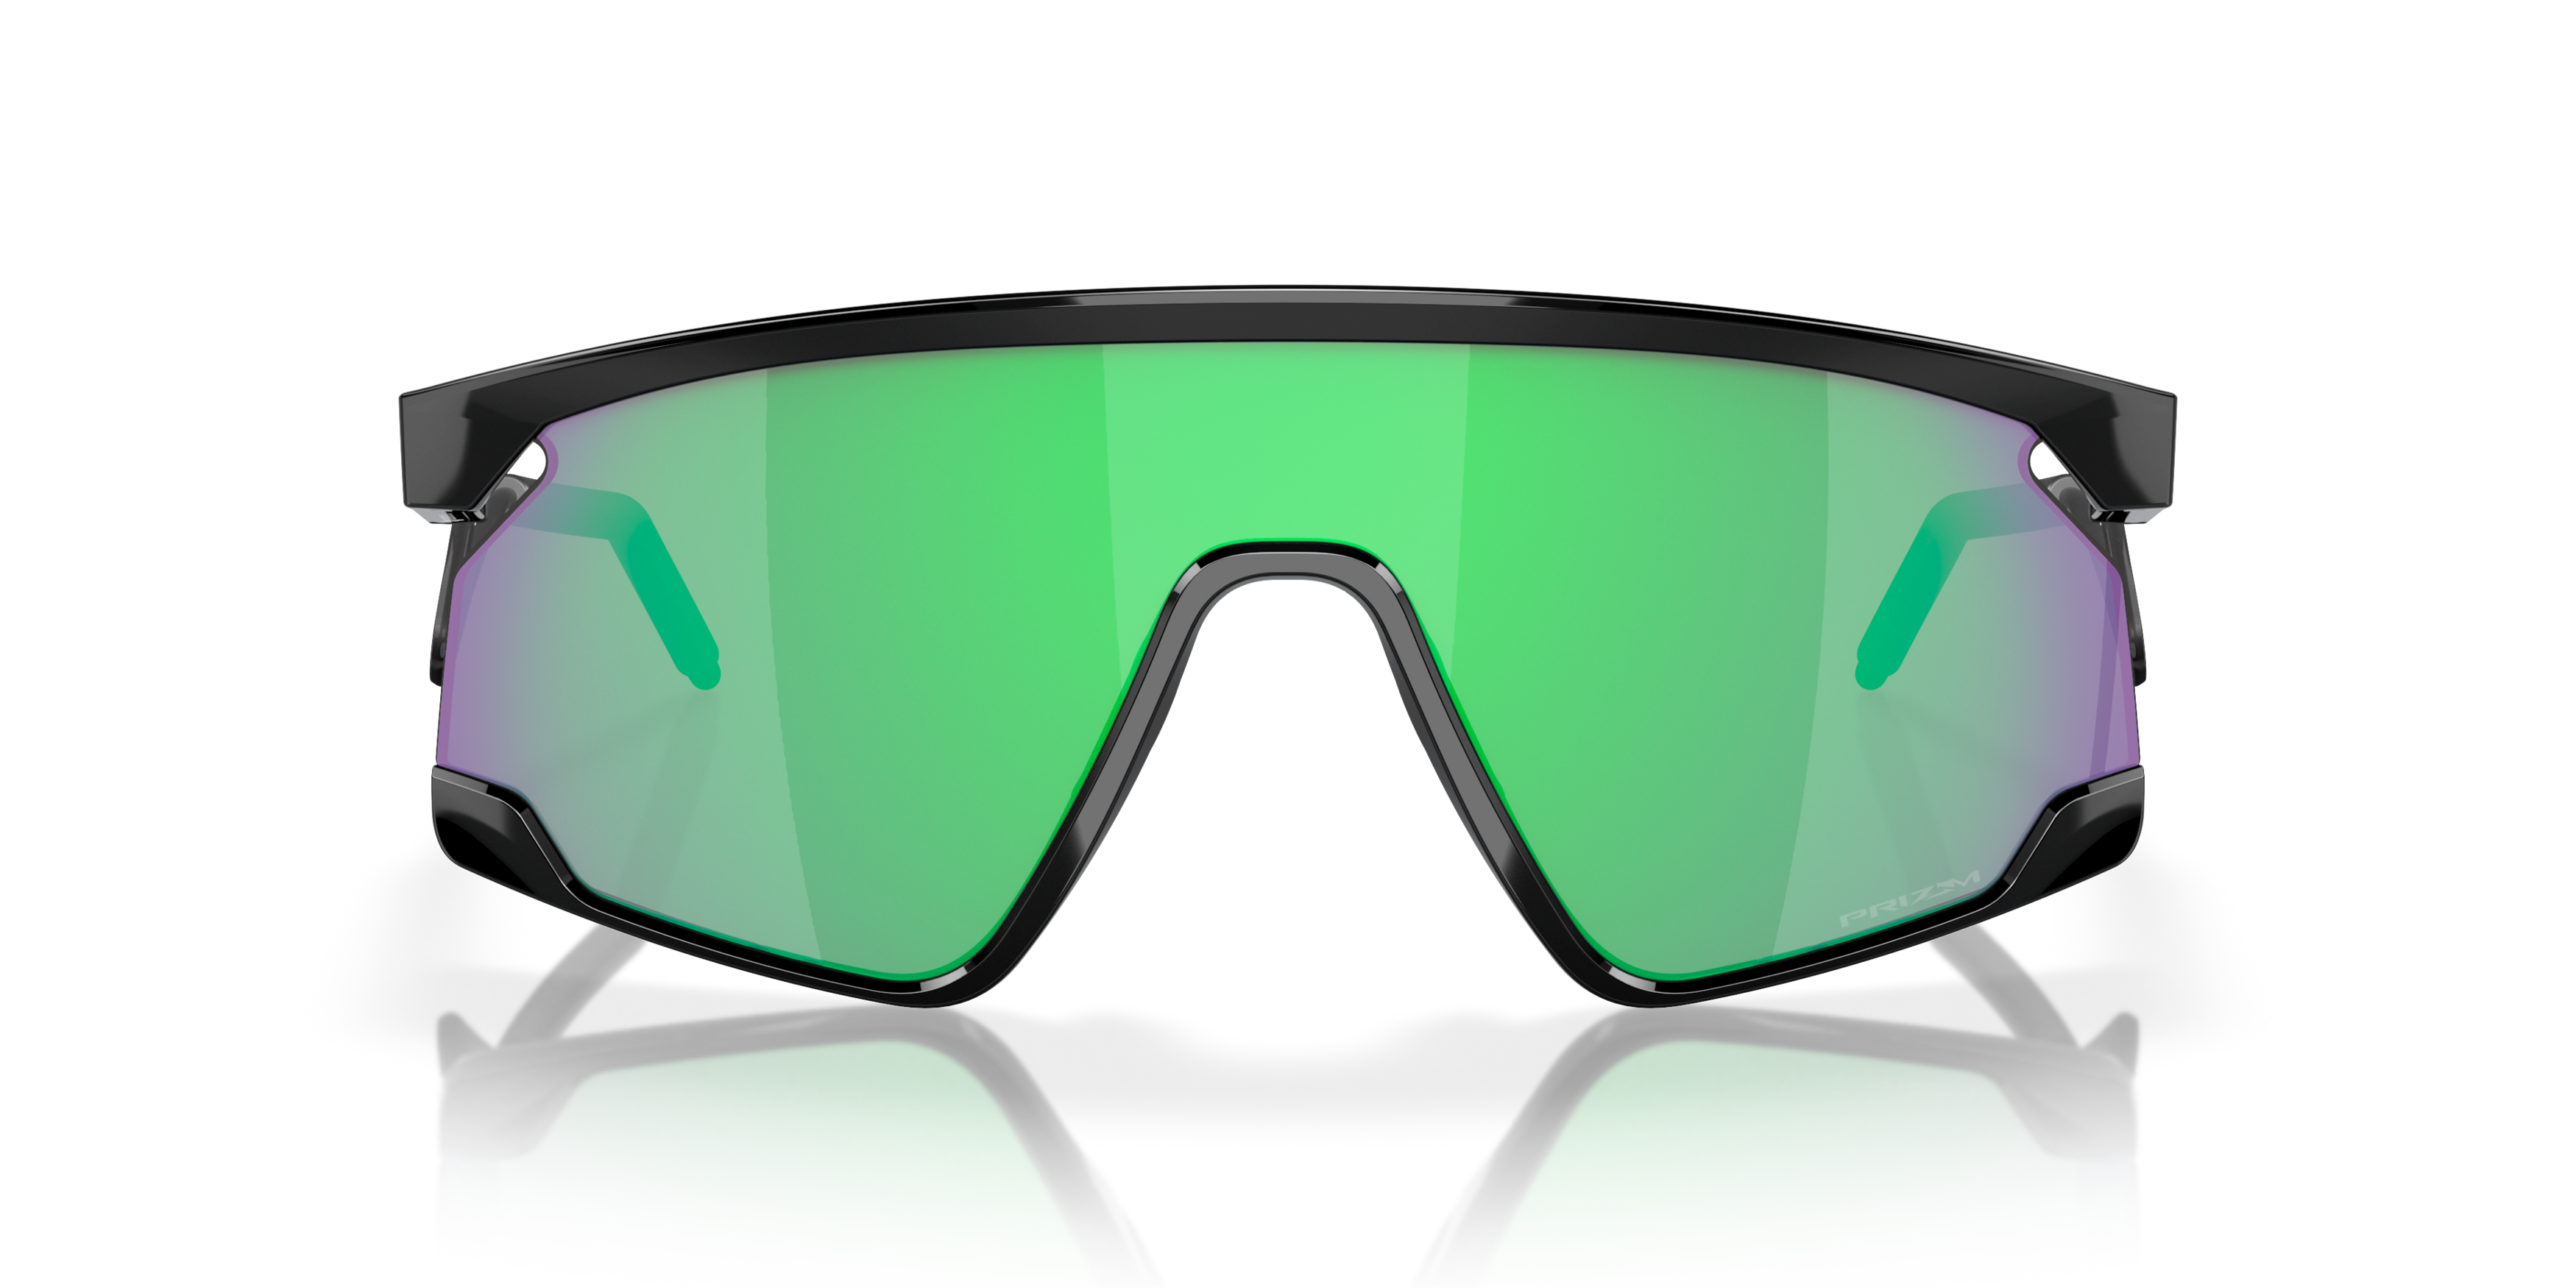 [products.image.front] Oakley 0OO9237 923707 Solbriller